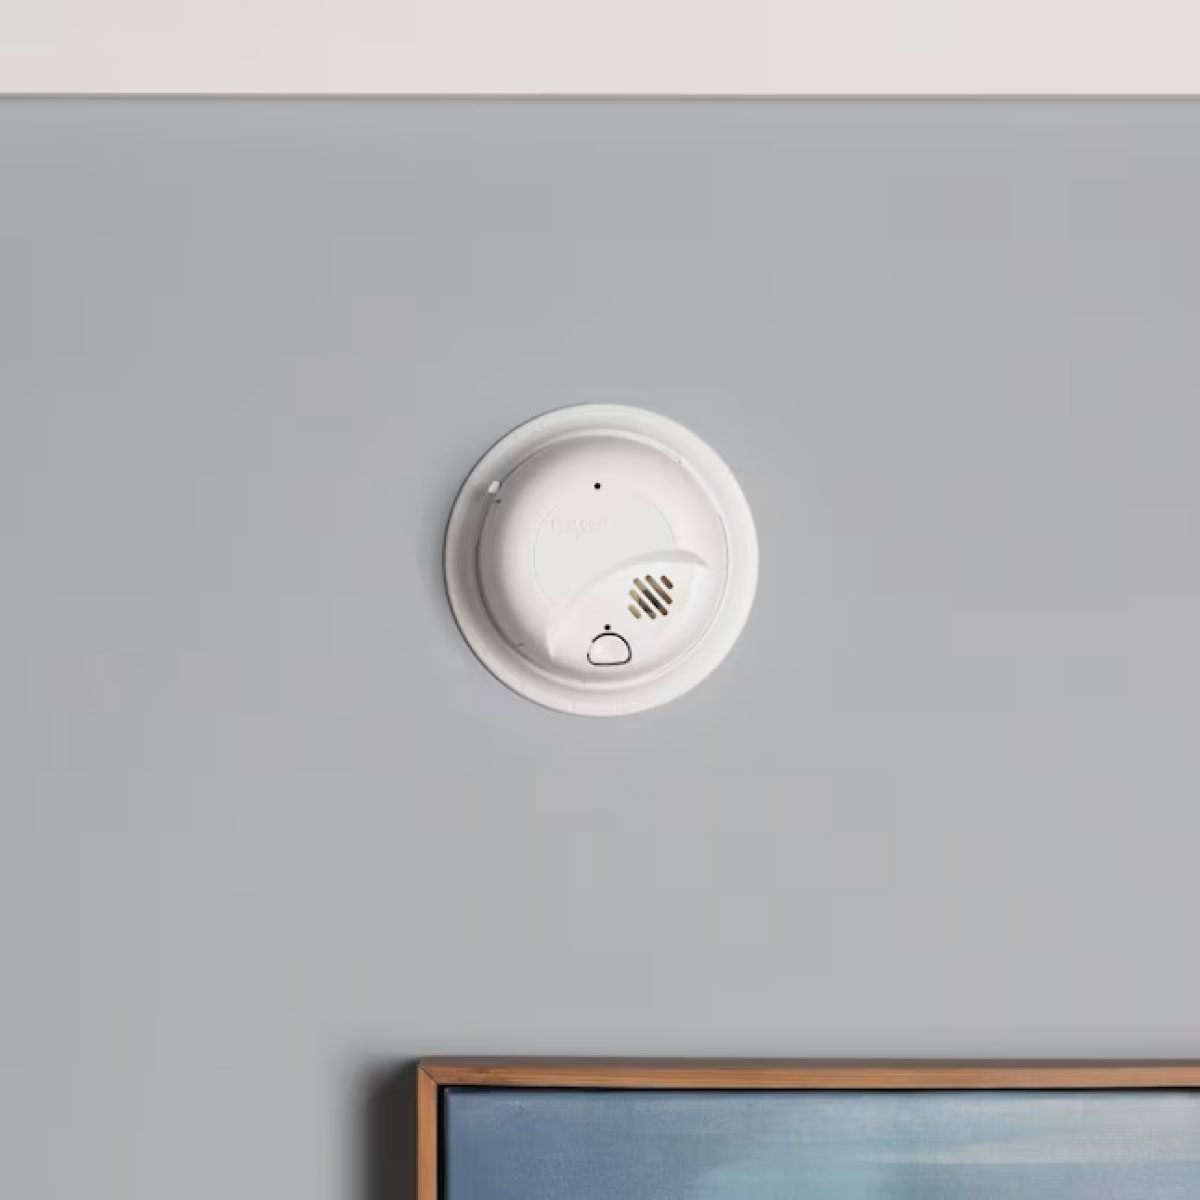 6 Types of Smoke Detectors for Your Home